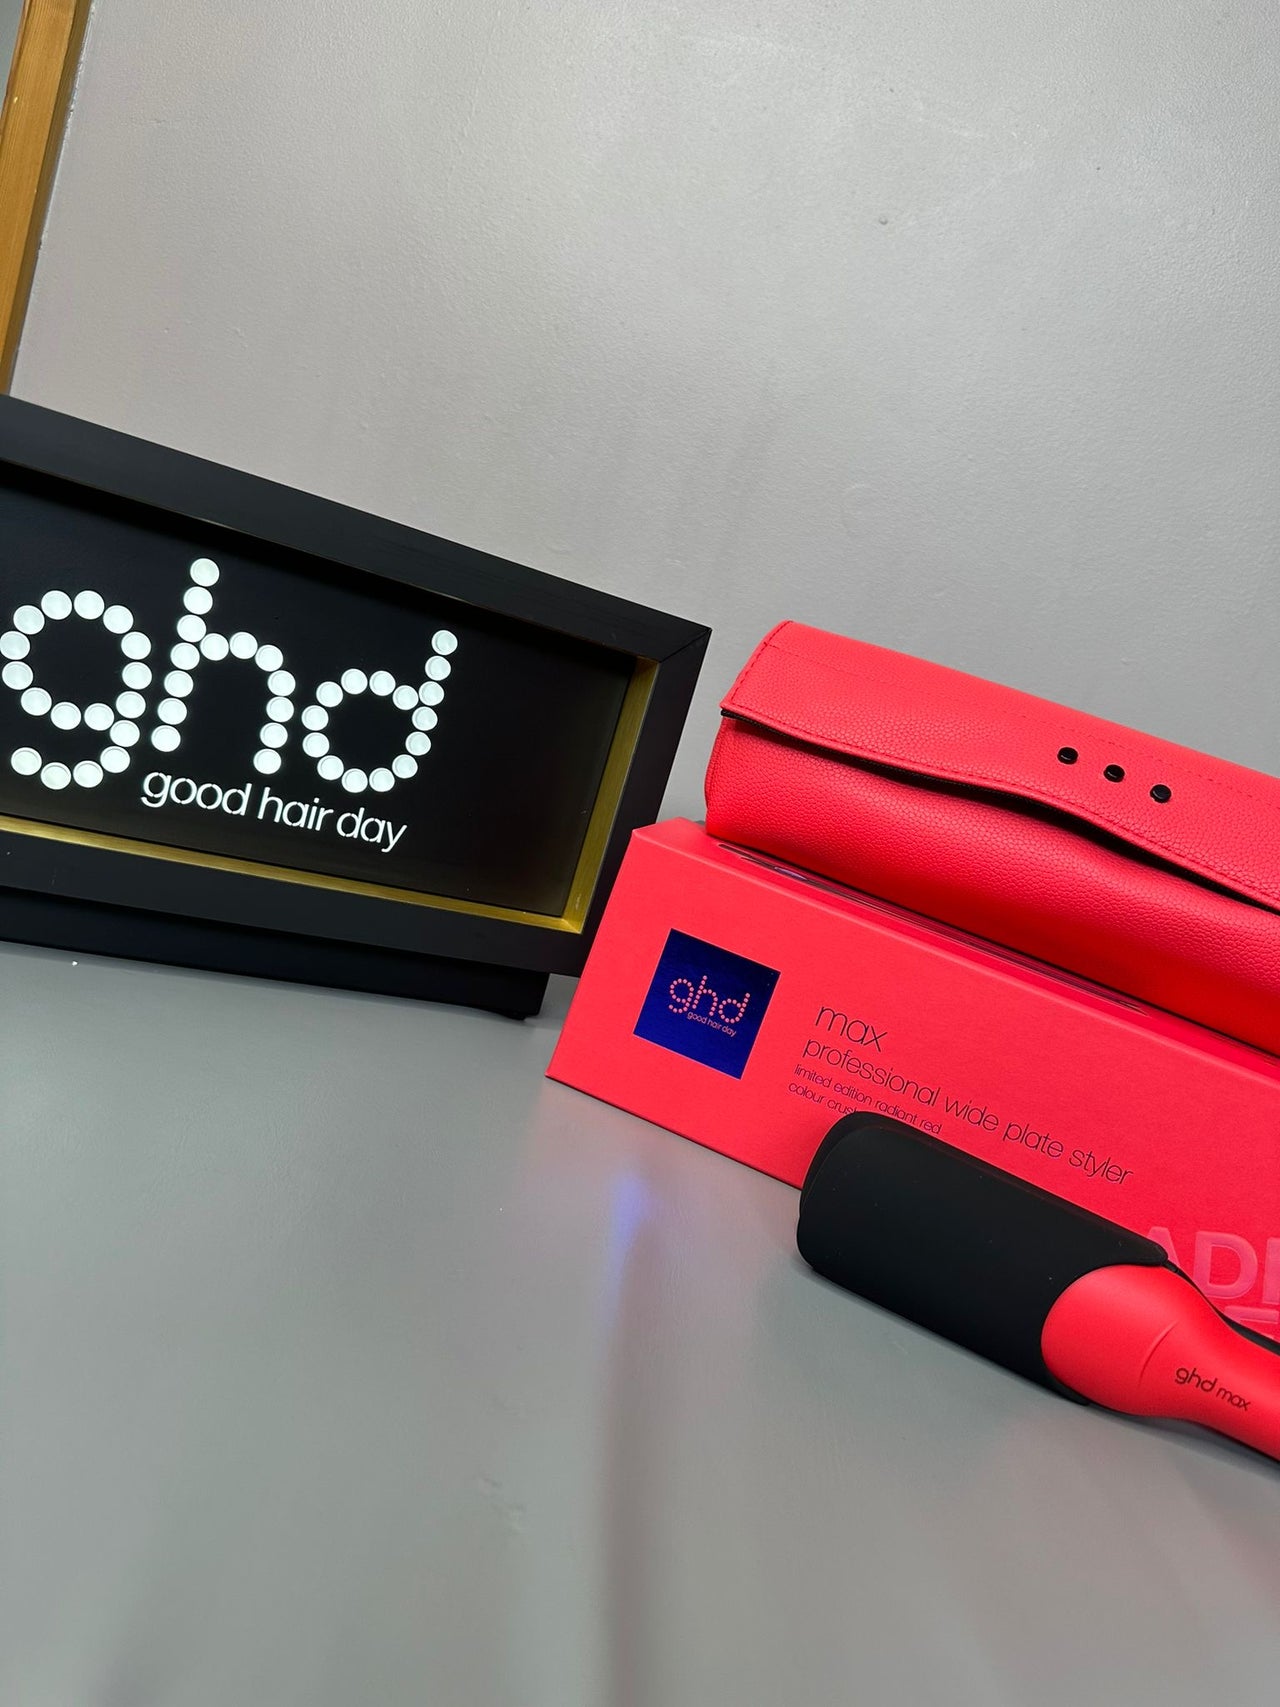 ghd max styler in red